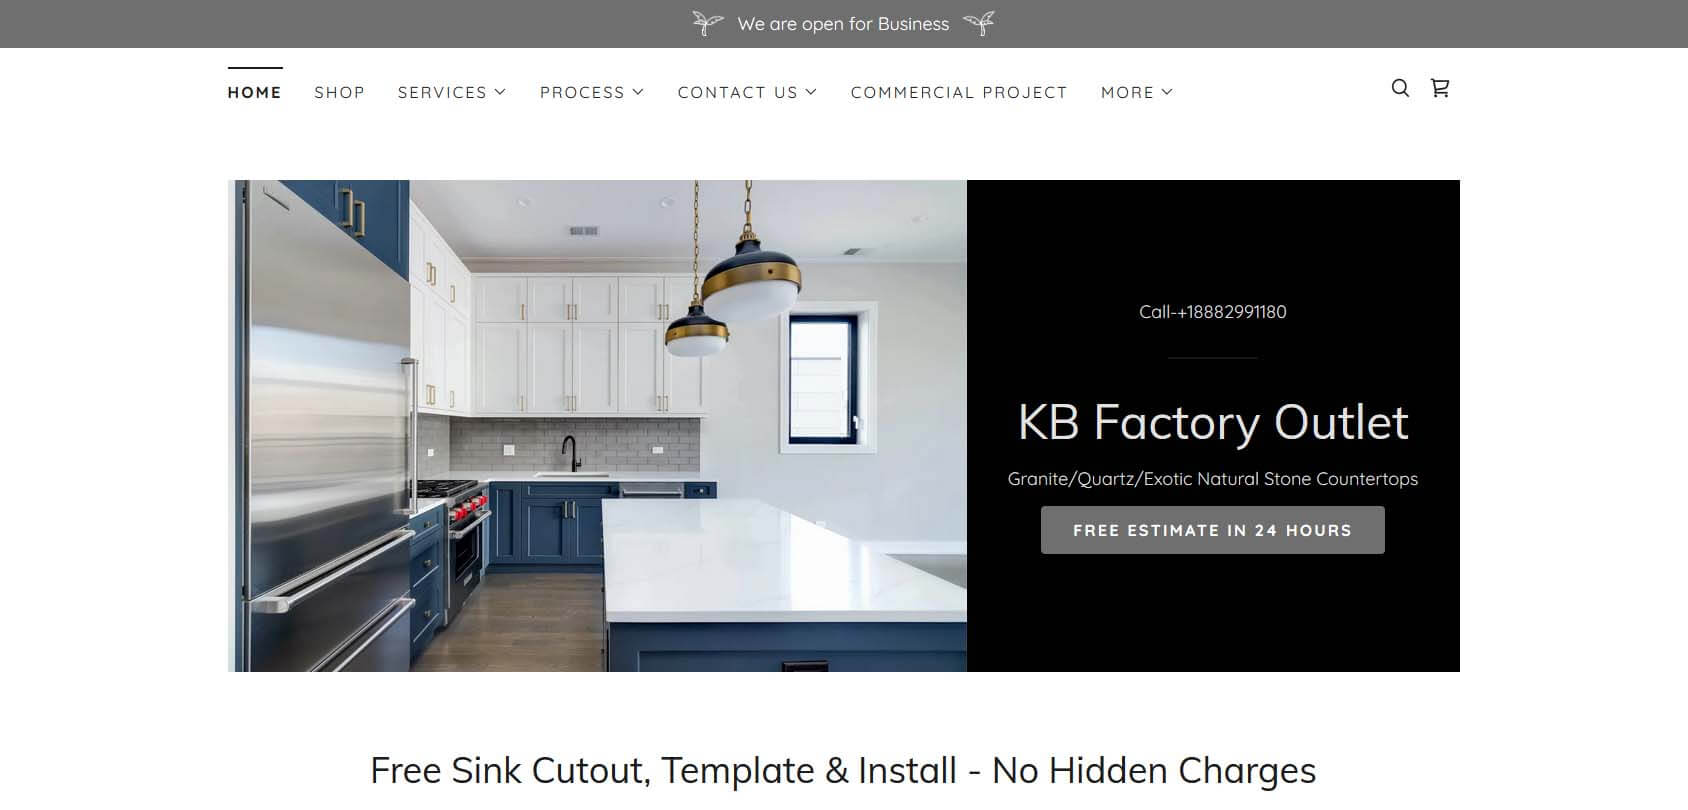 KB Factory Outlet Homepage